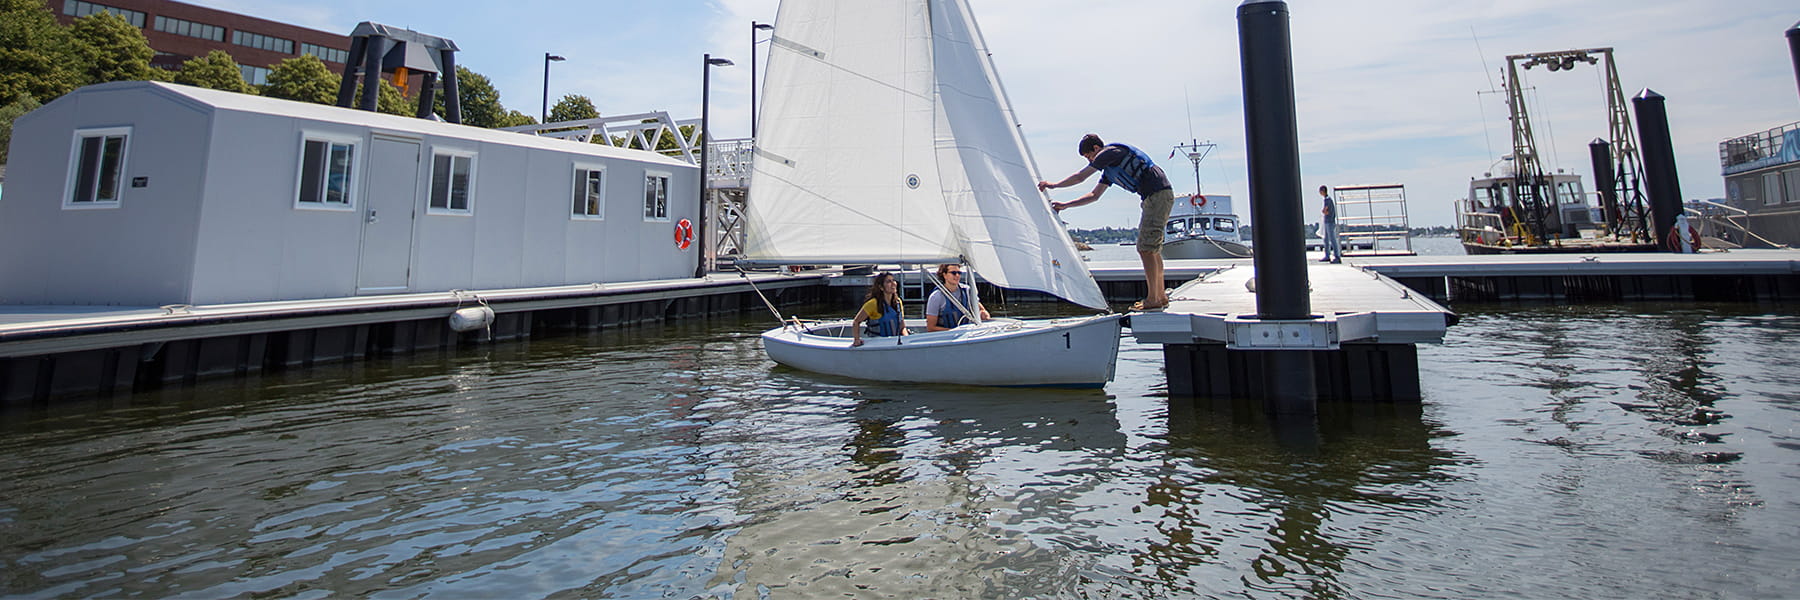 People getting into a sailboat at the dock.